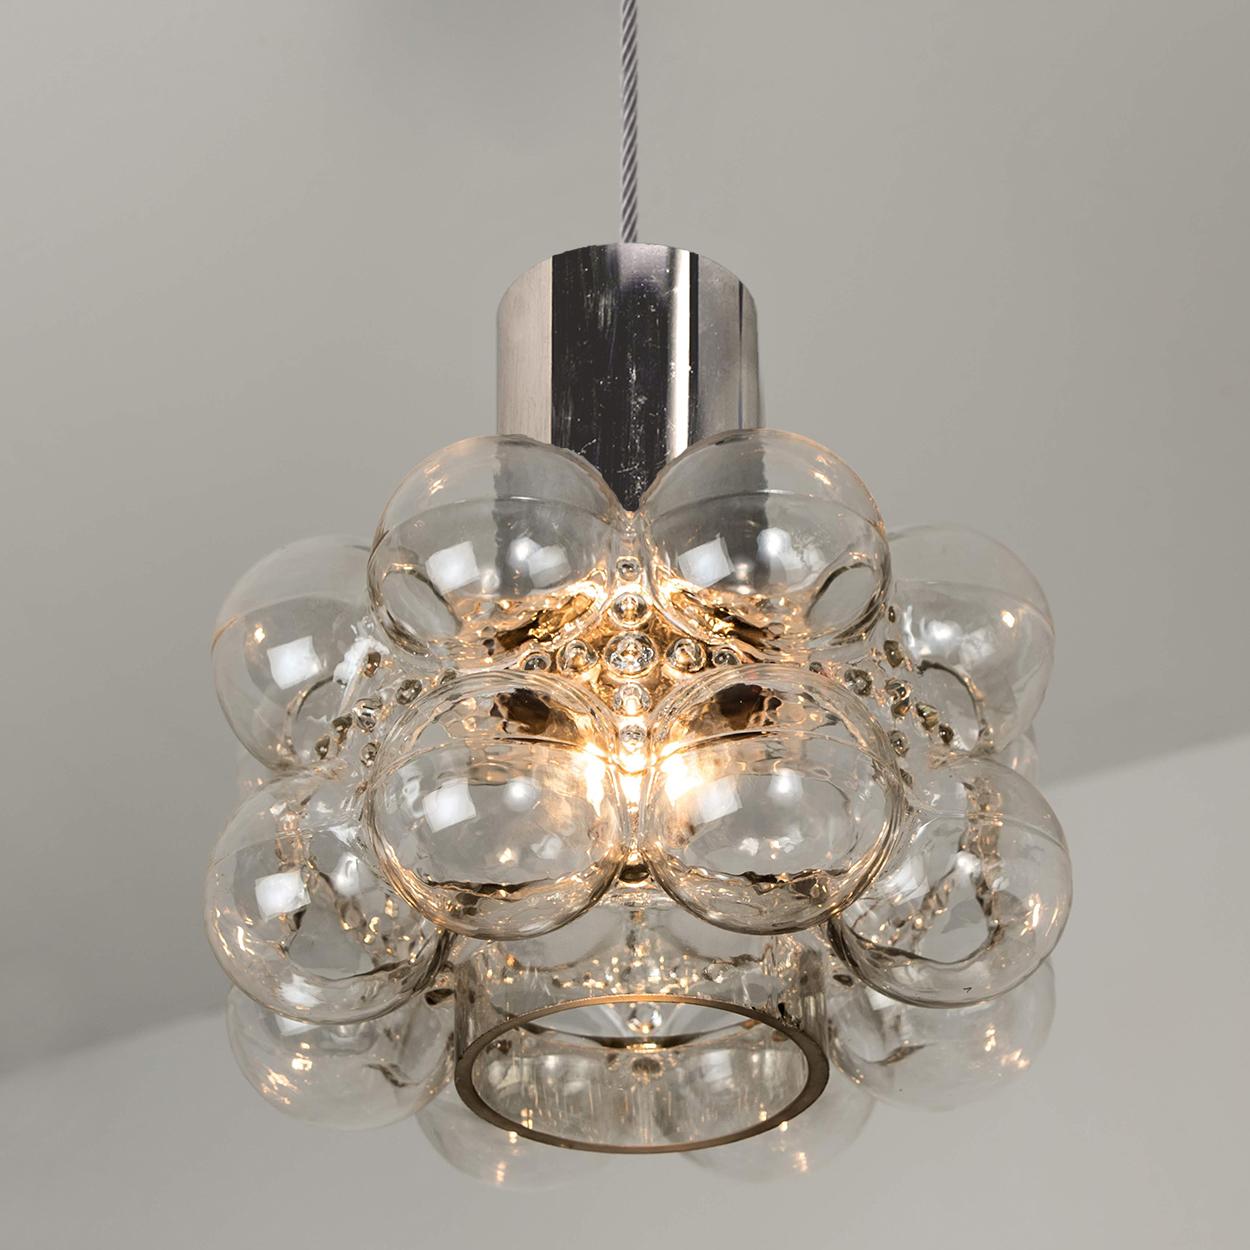 One of the three beautiful bubble glass chandeliers or pendant lights designed by Helena Tynell for Glashütte Limburg. A design Classic, the hand blown glass gives a wonderful warm glow.

The dimensions: Height 80 cm from ceiling, the diameter 30